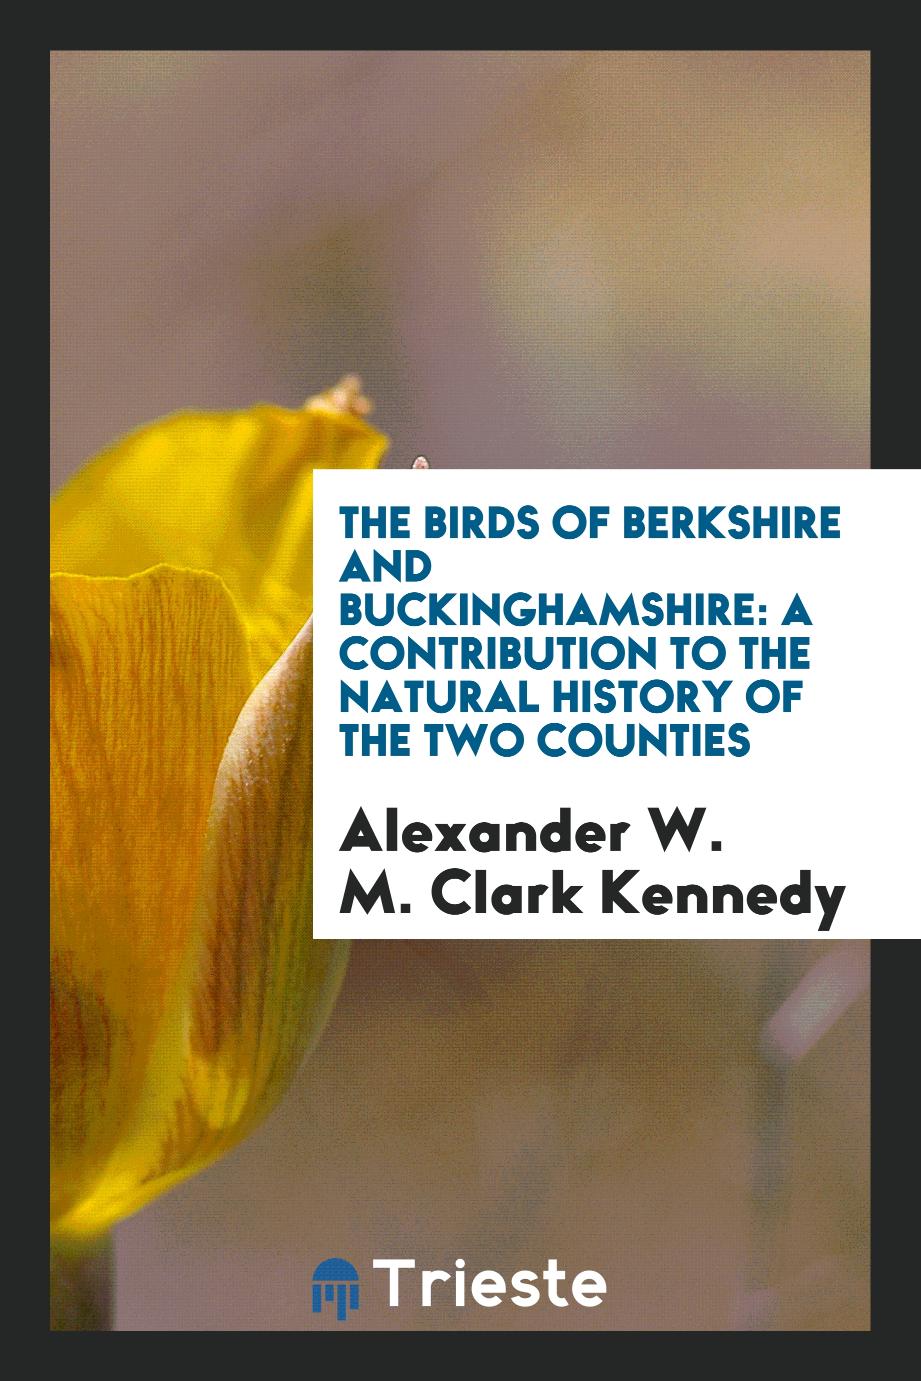 The birds of Berkshire and Buckinghamshire: a contribution to the natural history of the two counties